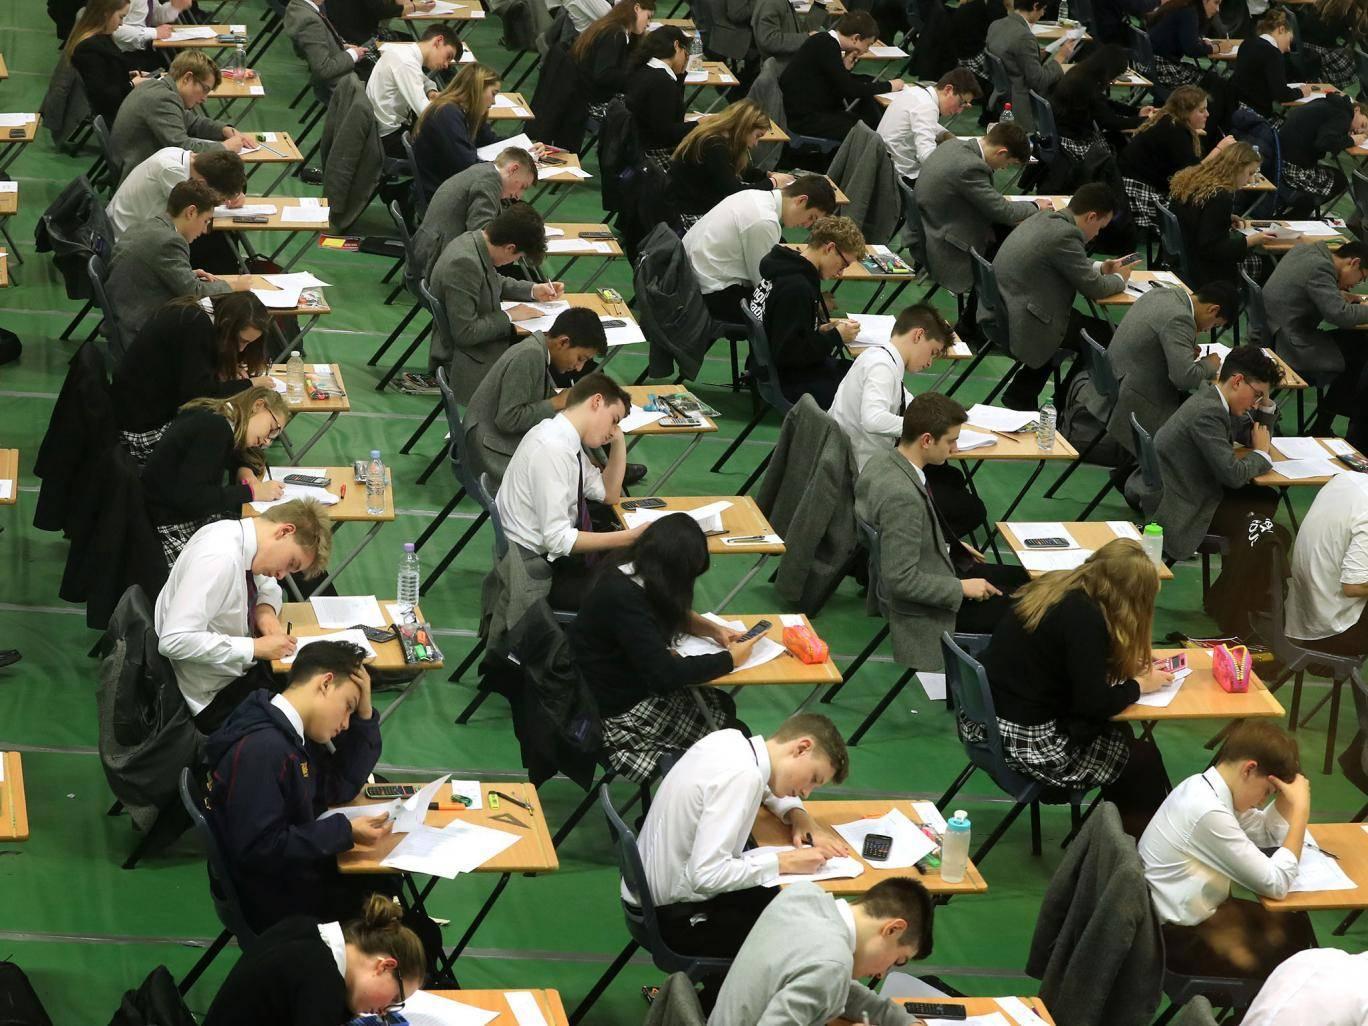 Teachers will still be able to set their own exams despite cheating scandal last summer